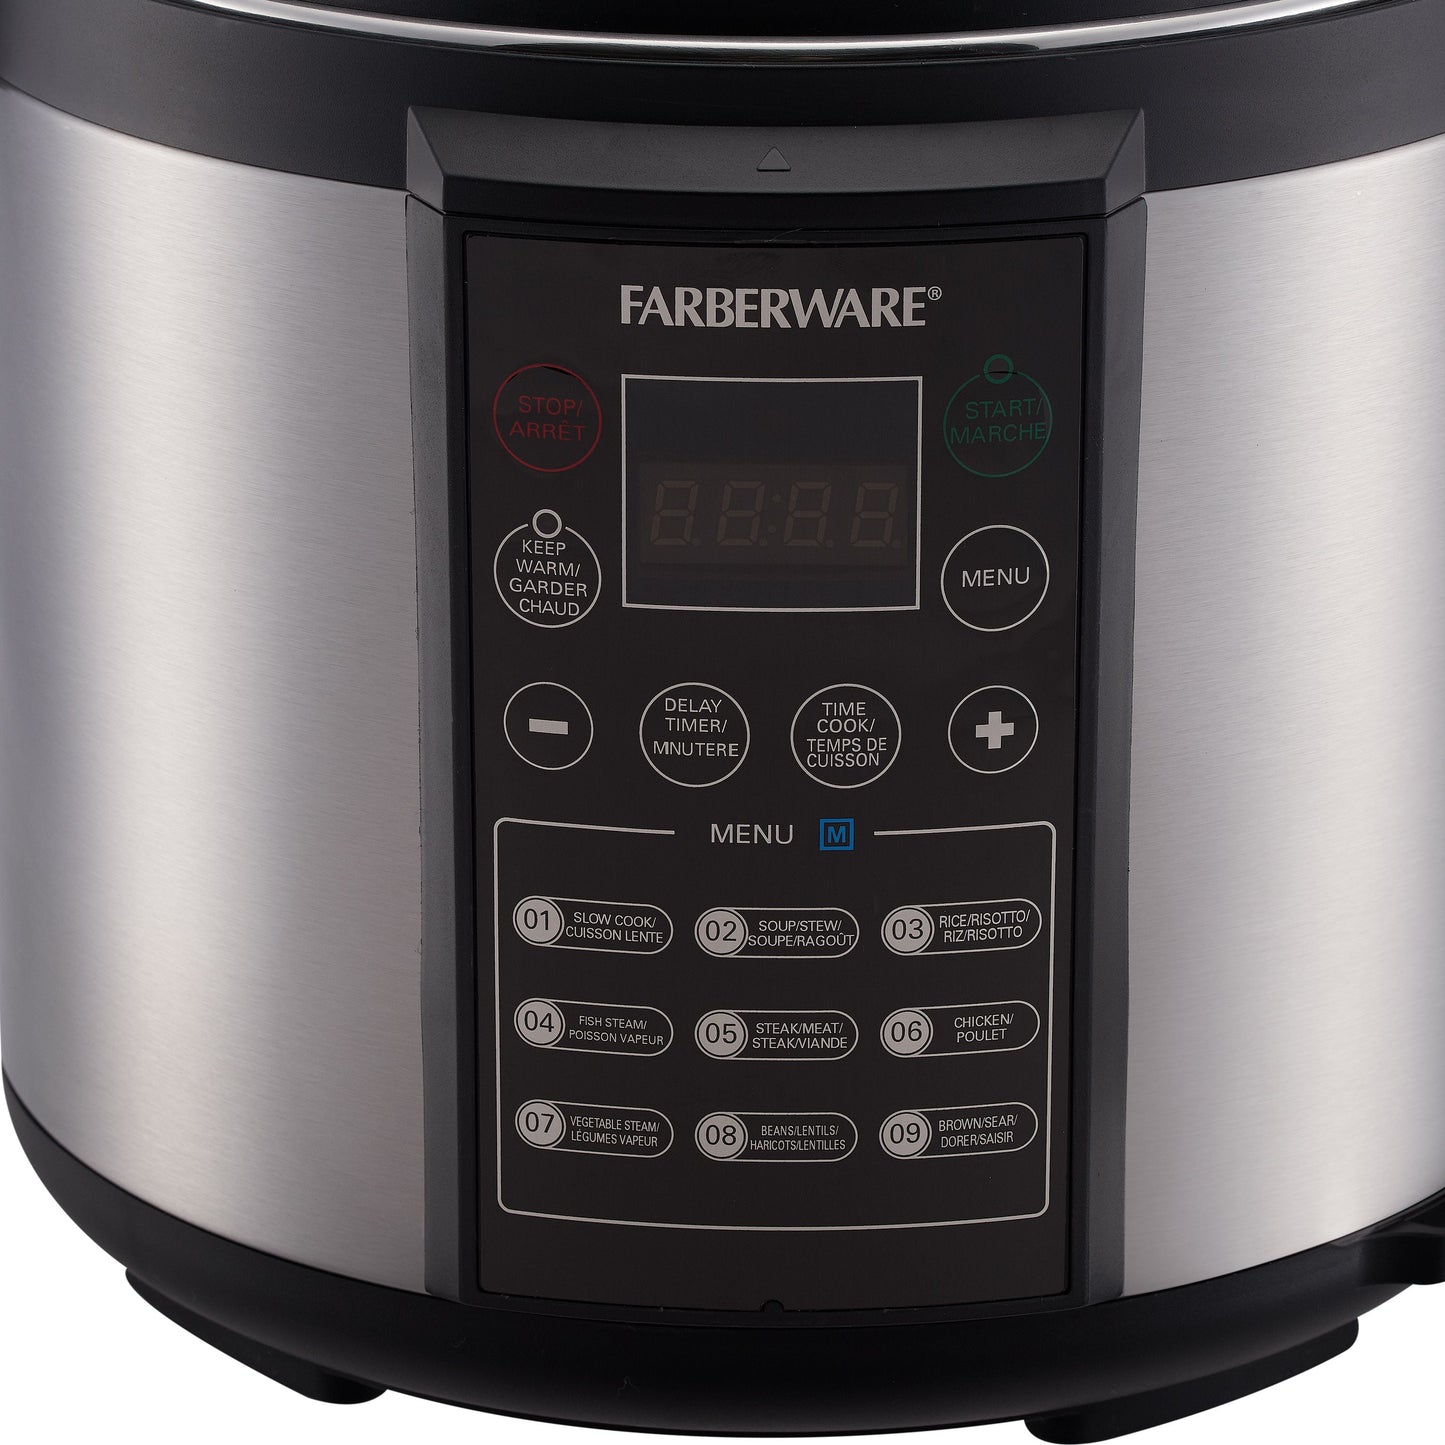 Instant Pot Duo Plus 9-in-1 Electric Pressure Cooker - 6 Quart - Stainless Steel - 15 One-Touch Programs